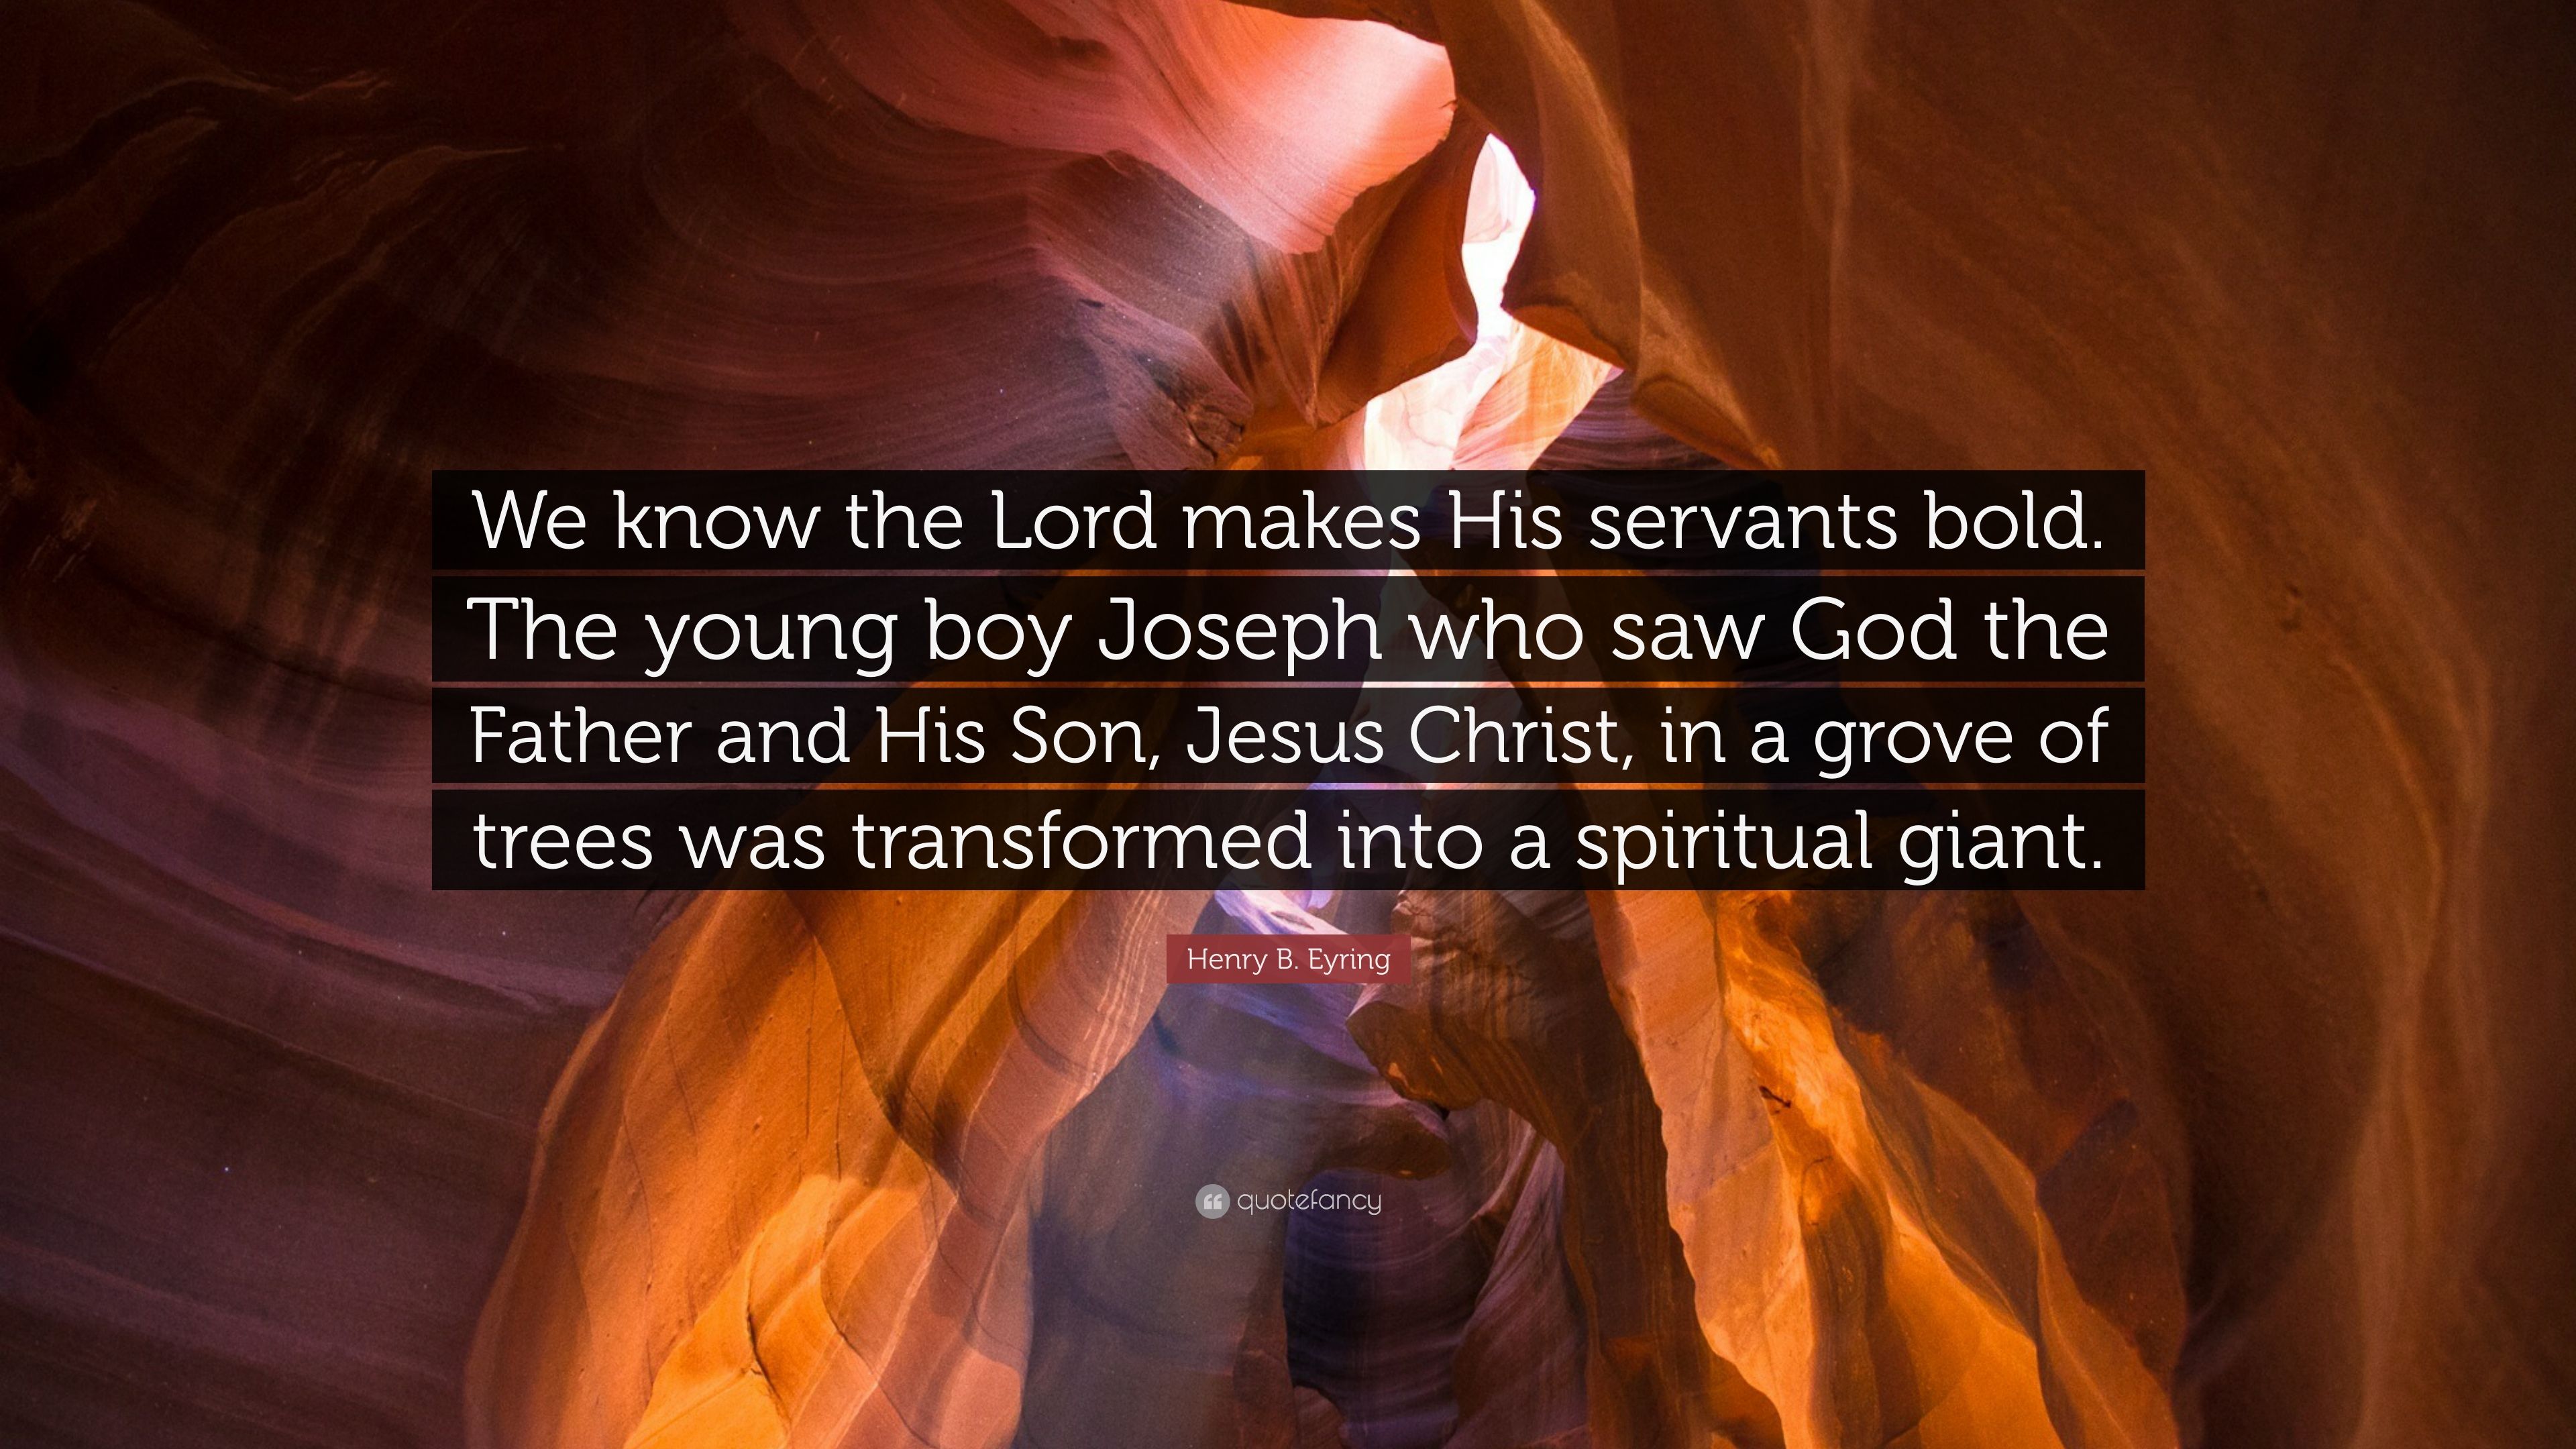 Henry B. Eyring Quote: “We know the Lord makes His servants bold. The young boy Joseph who saw God the Father and His Son, Jesus Christ, in a gr.” (7 wallpaper)